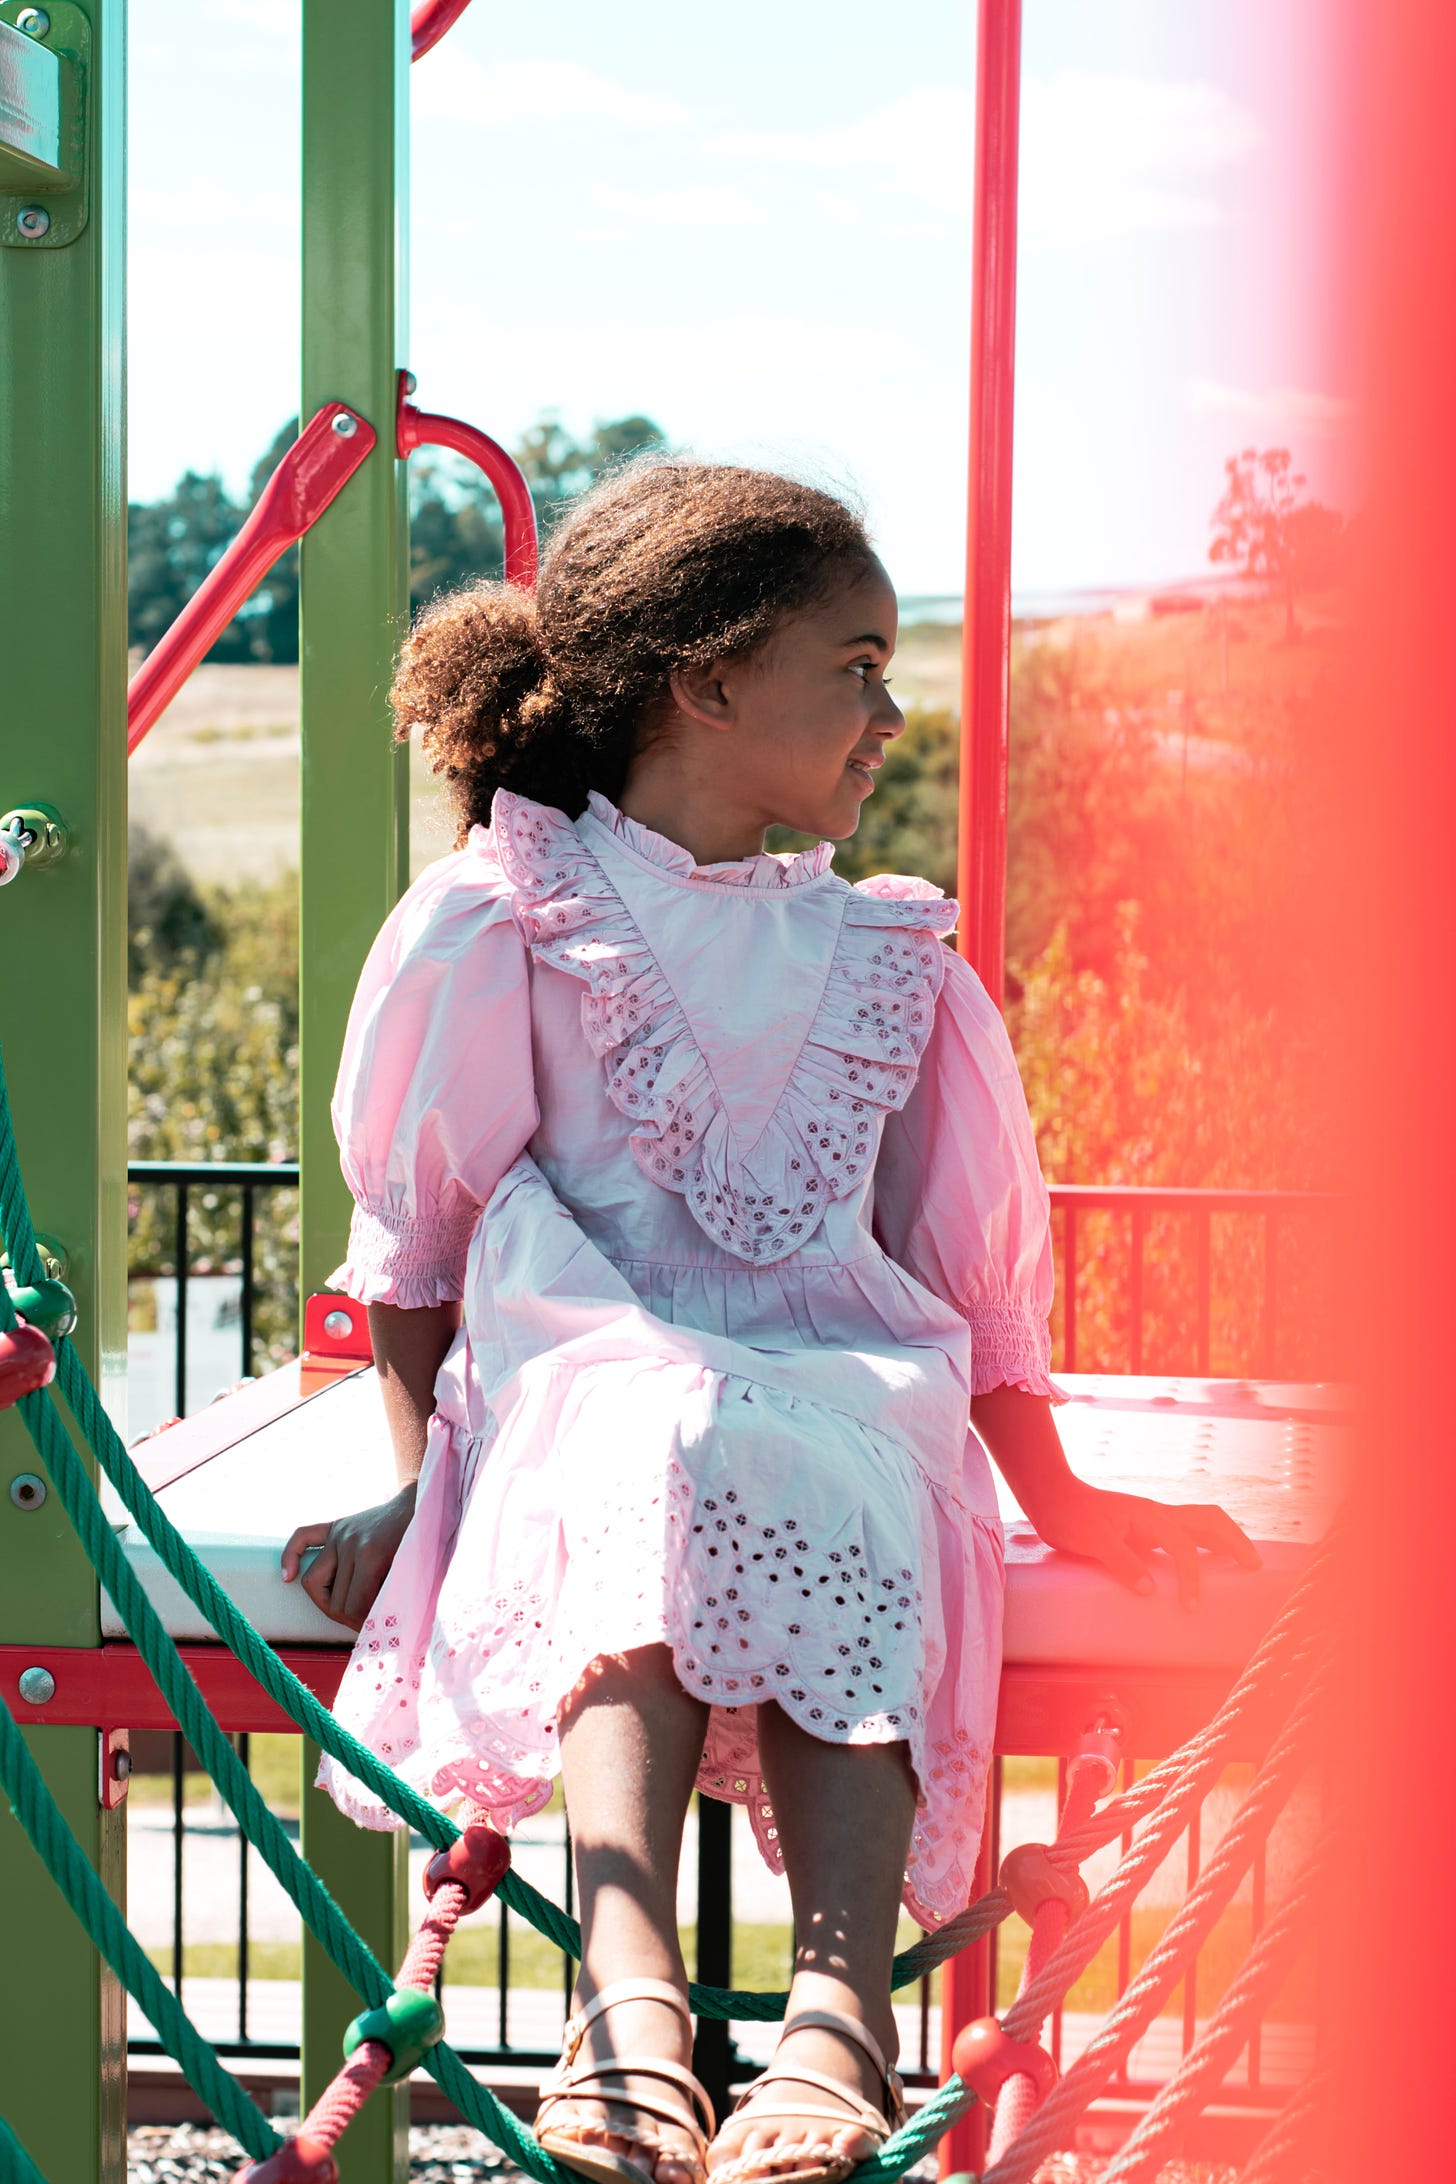 Young Black girl sits on red playground gym platform. She is smiling, head to side.